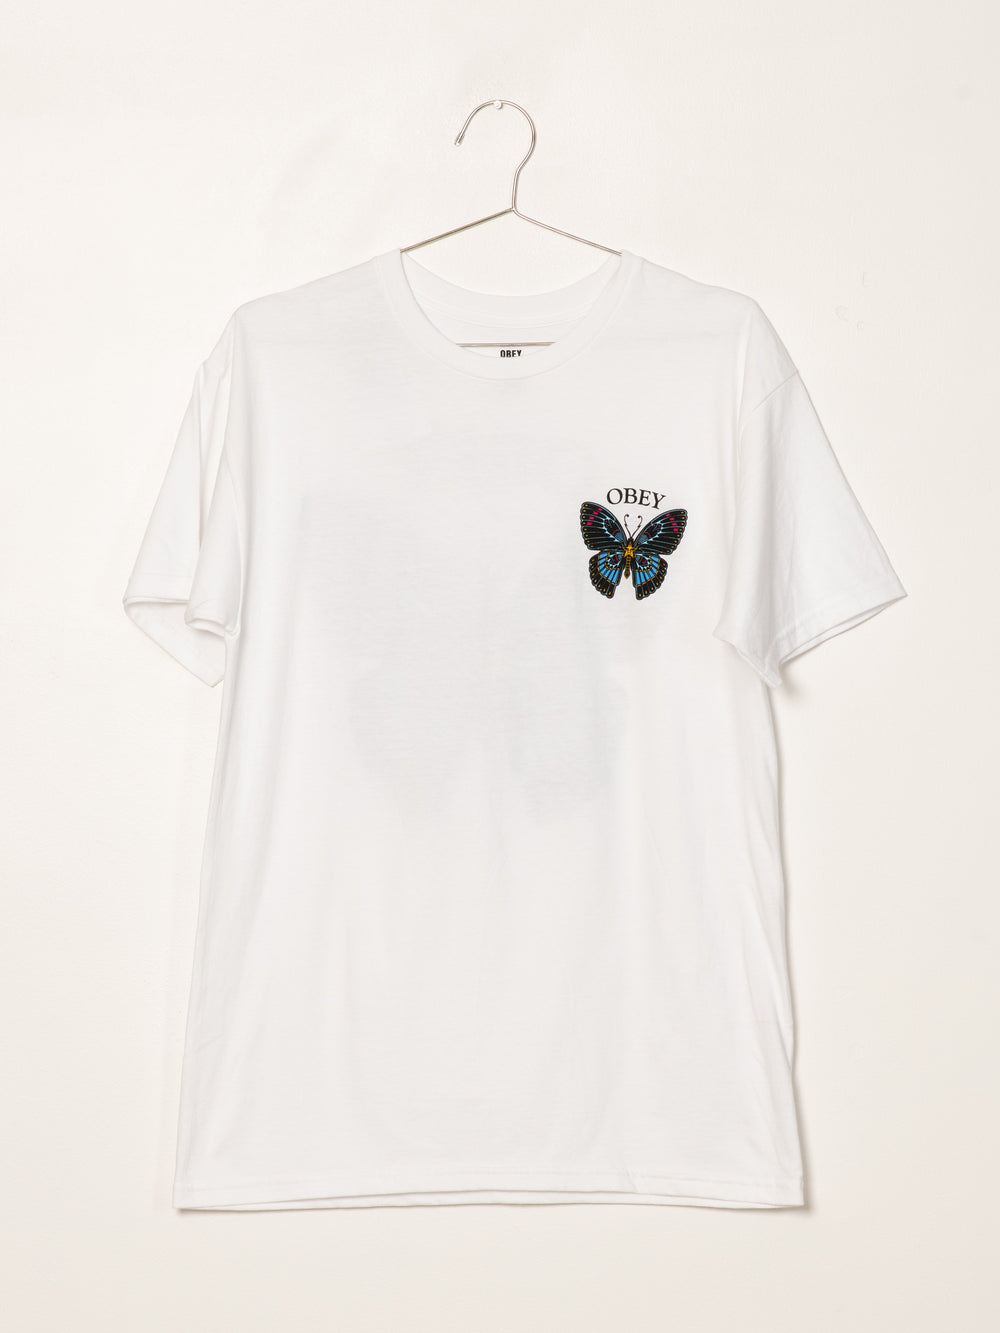 T-SHIRT OBEY FLY AWAY - LIQUIDATION